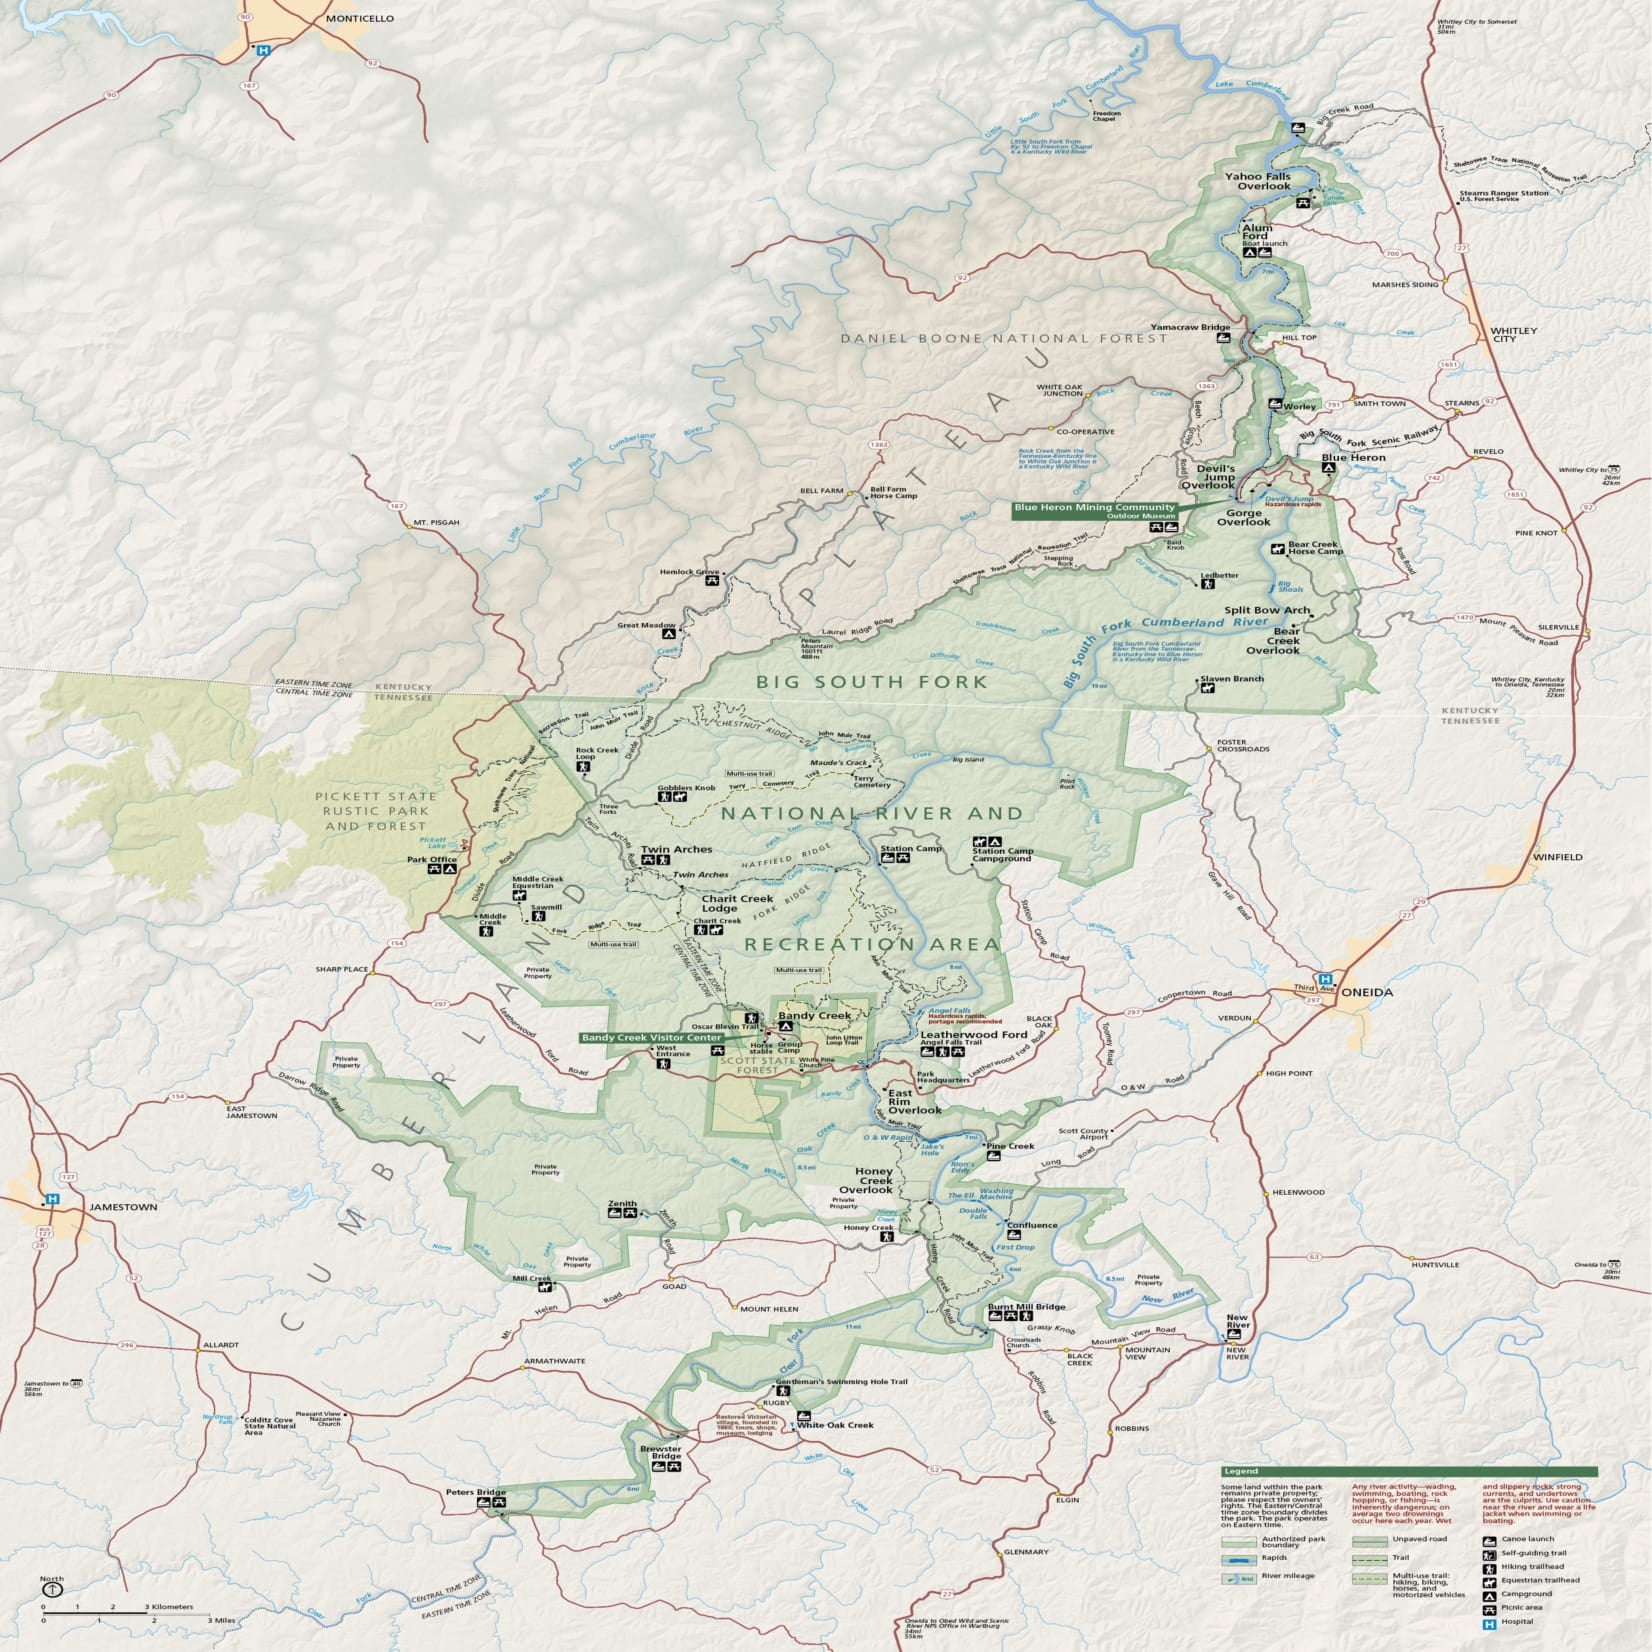 big south fork national river and recreation area map